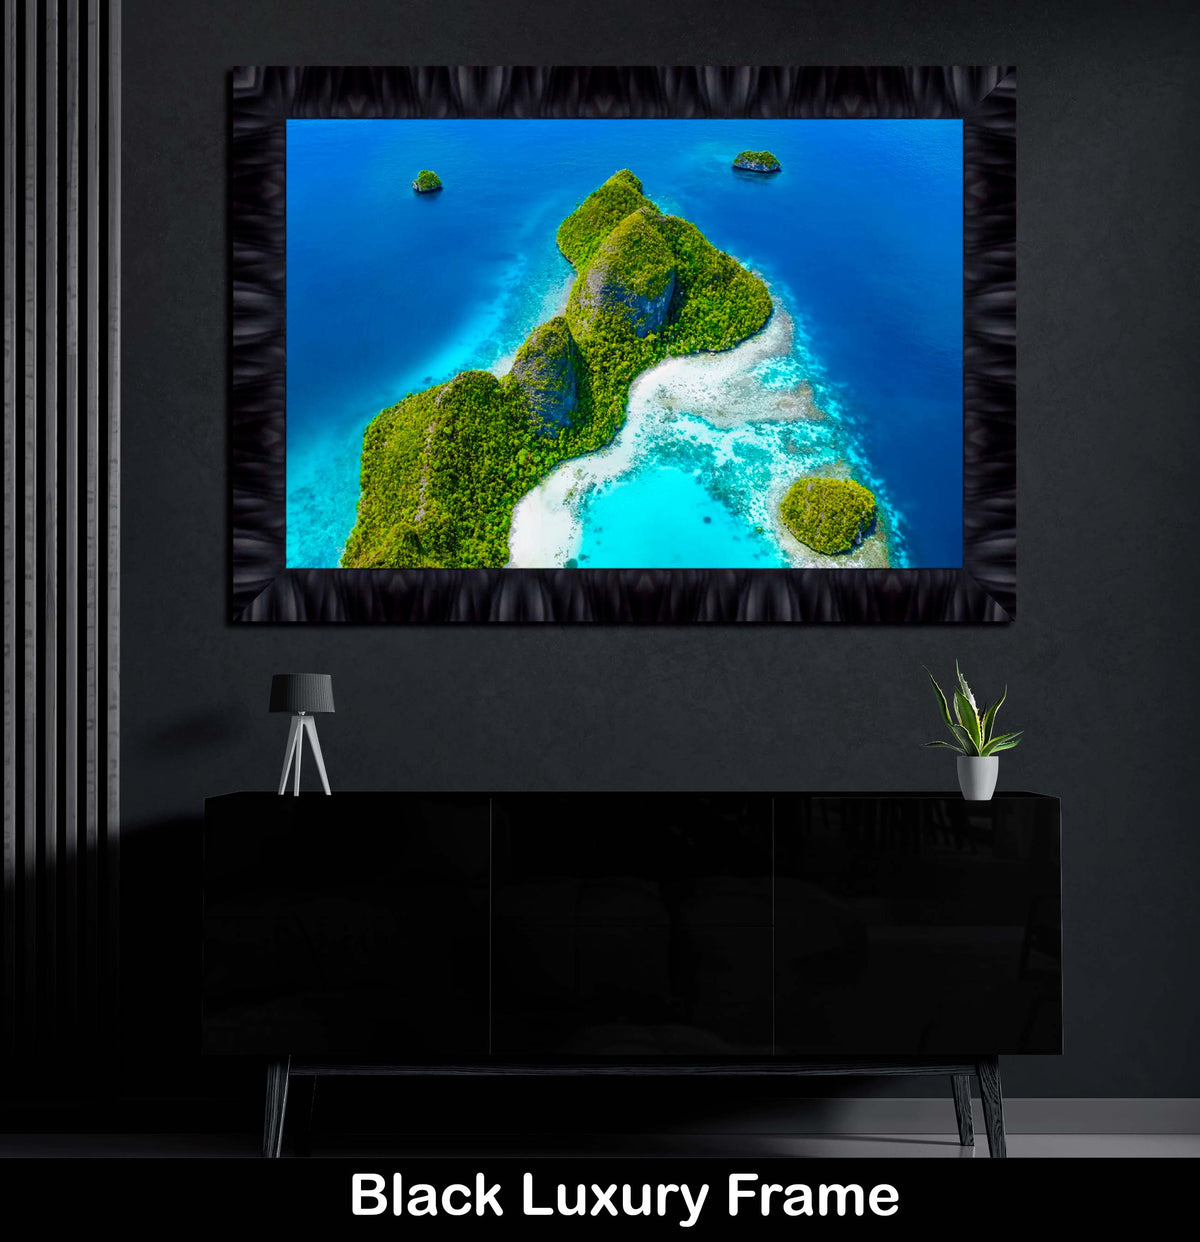 Blue Ocean Large Framed Luxury Wall Art Print Turquoise Tropical Coral Reefs